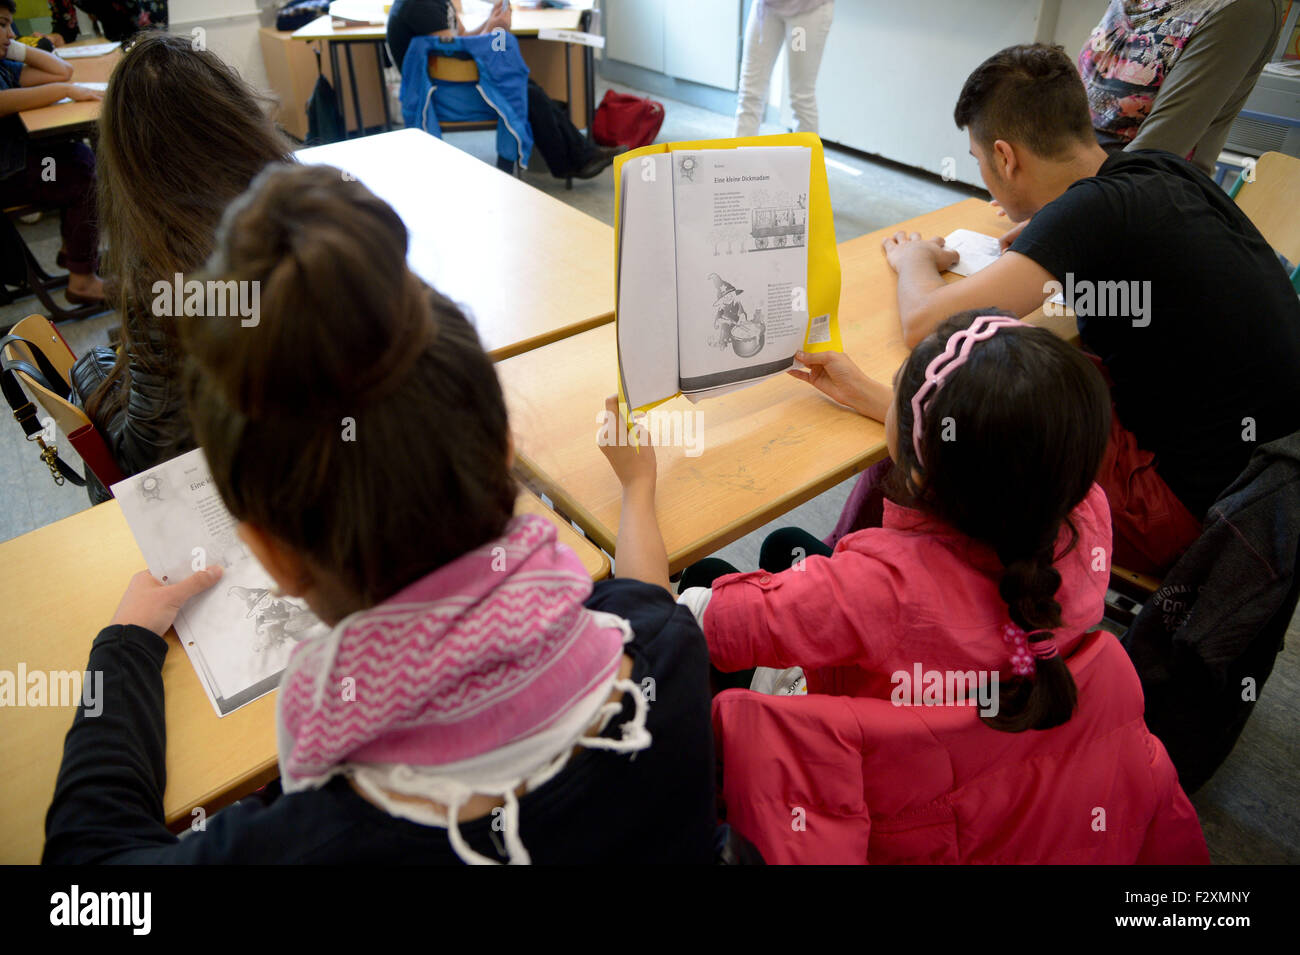 Adolescents attend a German-language class at Hauptschule Peter Ustinov (Peter Ustinov secondary school) in Hanover, Germany, 23 September 2015. Around 20,000 to 30,000 young refugees are expected to arrive in Germany without their parents this year. The child protective services of the respective city they arrive in are responsible for their care. Photo: Peter Steffen/dpa Stock Photo